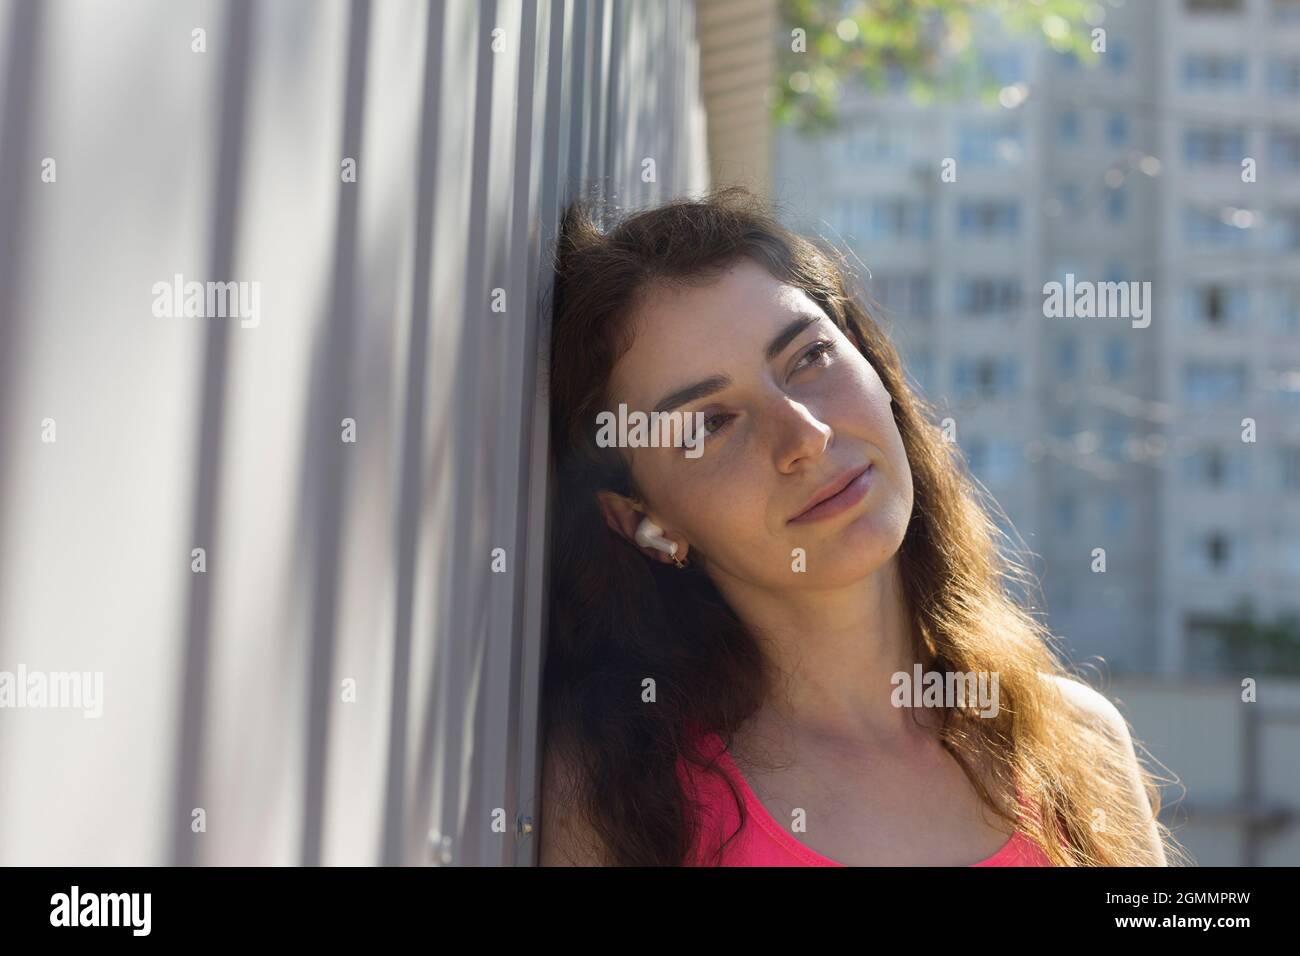 Serene young woman leaning against wall Stock Photo